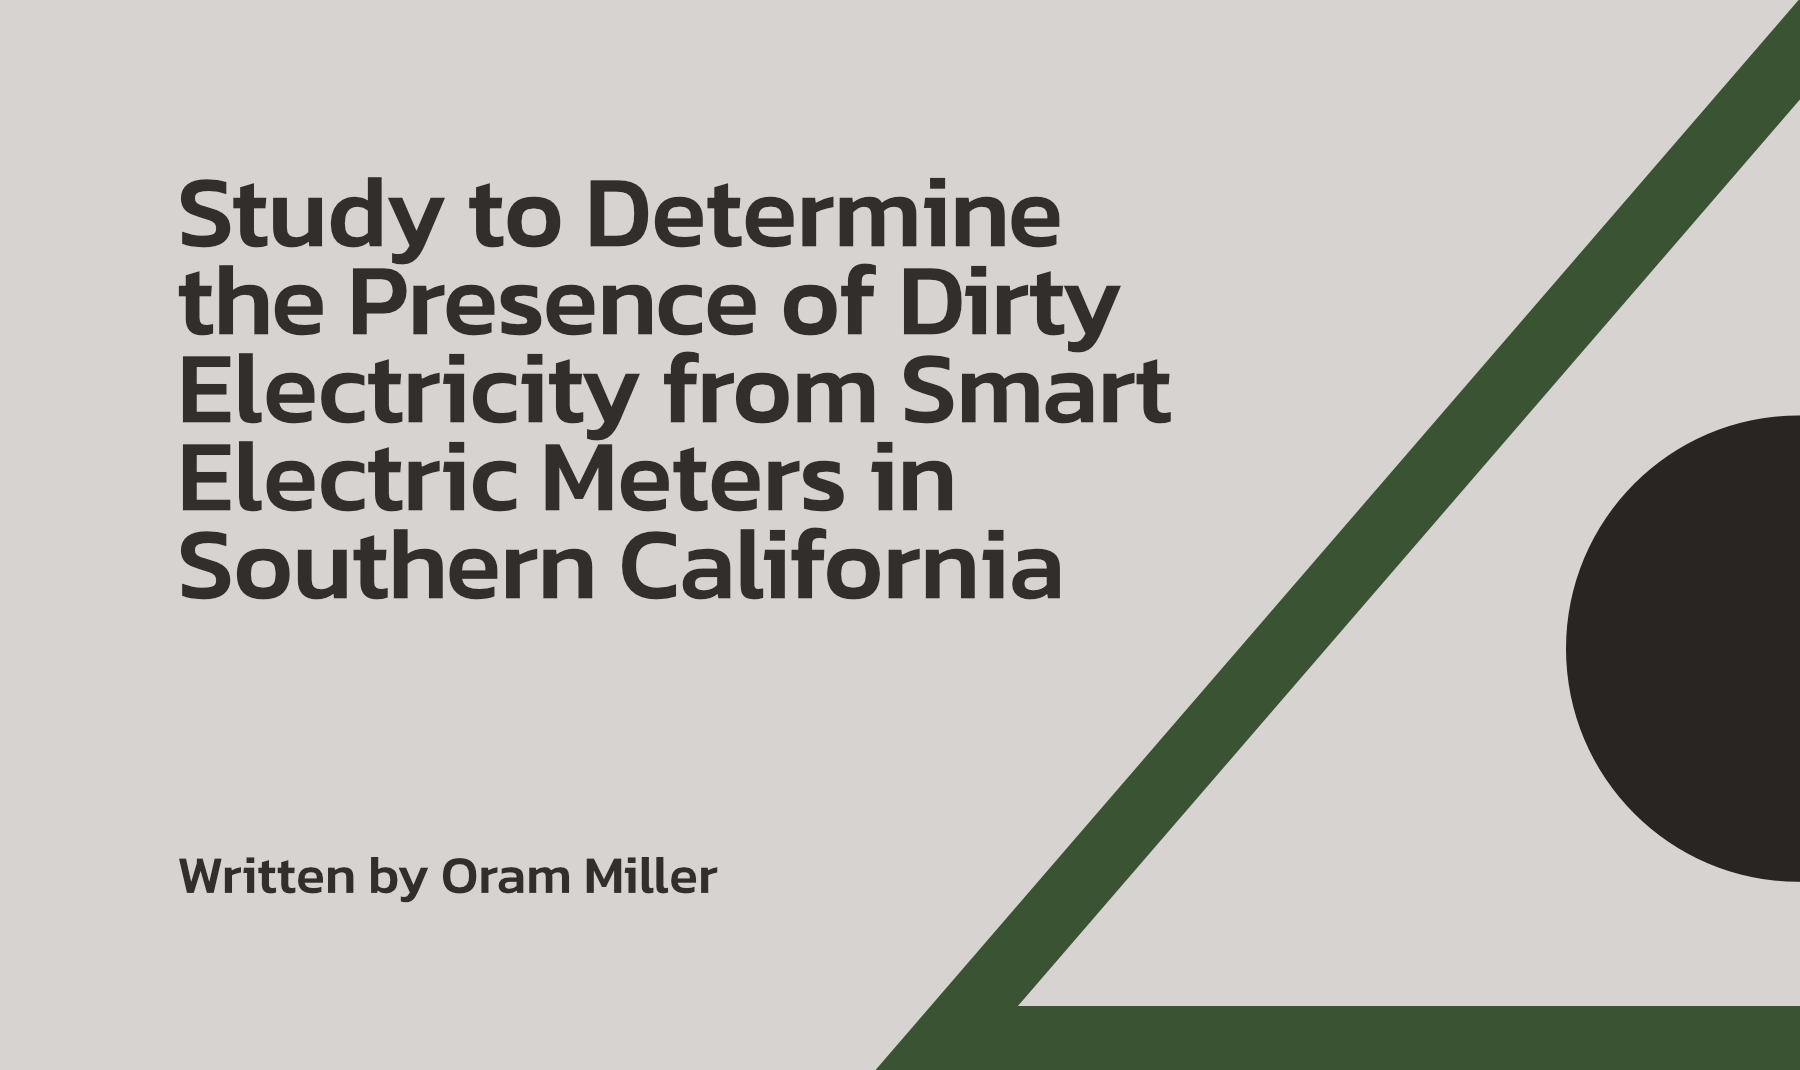 Study to Determine the Presence of Dirty Electricity from Smart Electric Meters in Southern California